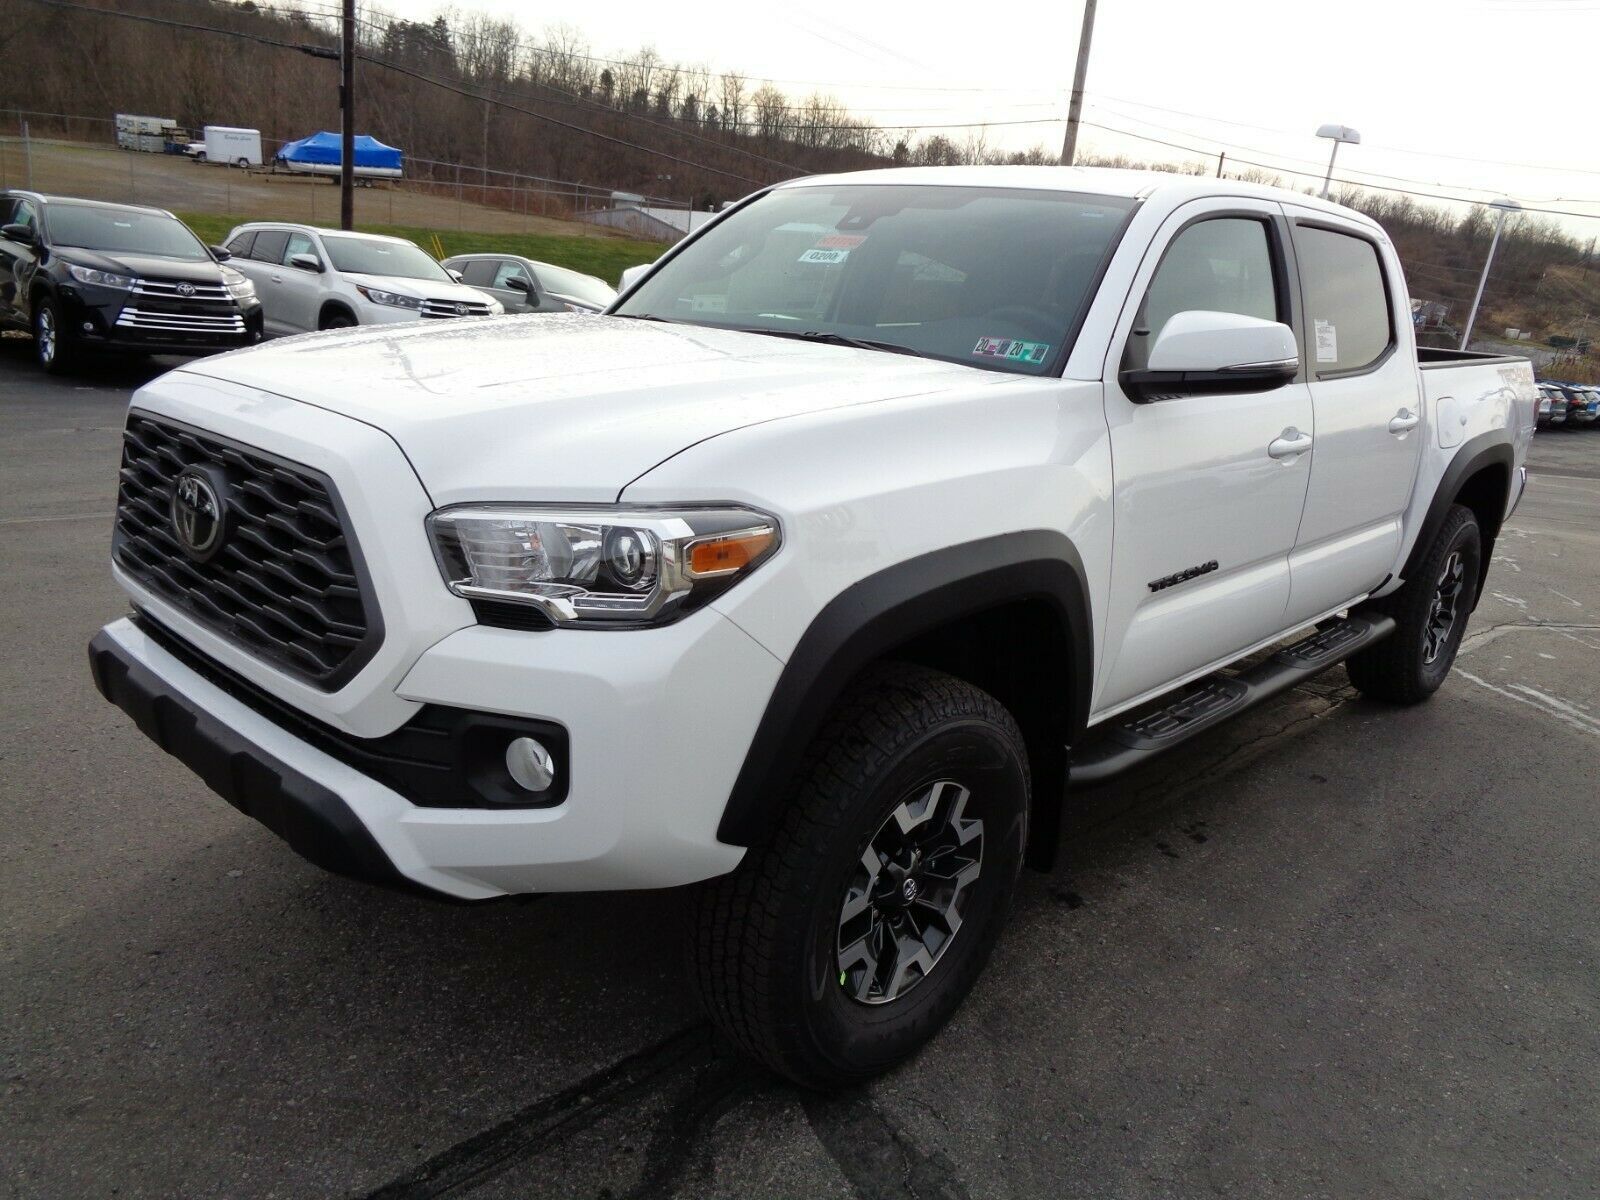 Its durability, performance and good looks make it easy to see why the tacoma has so many fans. Used 2020 Toyota Tacoma New 2020 Double Cab 4x4 3 5l 4wd Trd Offroad Stick New 2020 Tacoma Double Cab 4x4 Trd Off Road 6 Speed Manual 4wd Super White Paint 2020 Toyota Tacoma Tacoma Trd